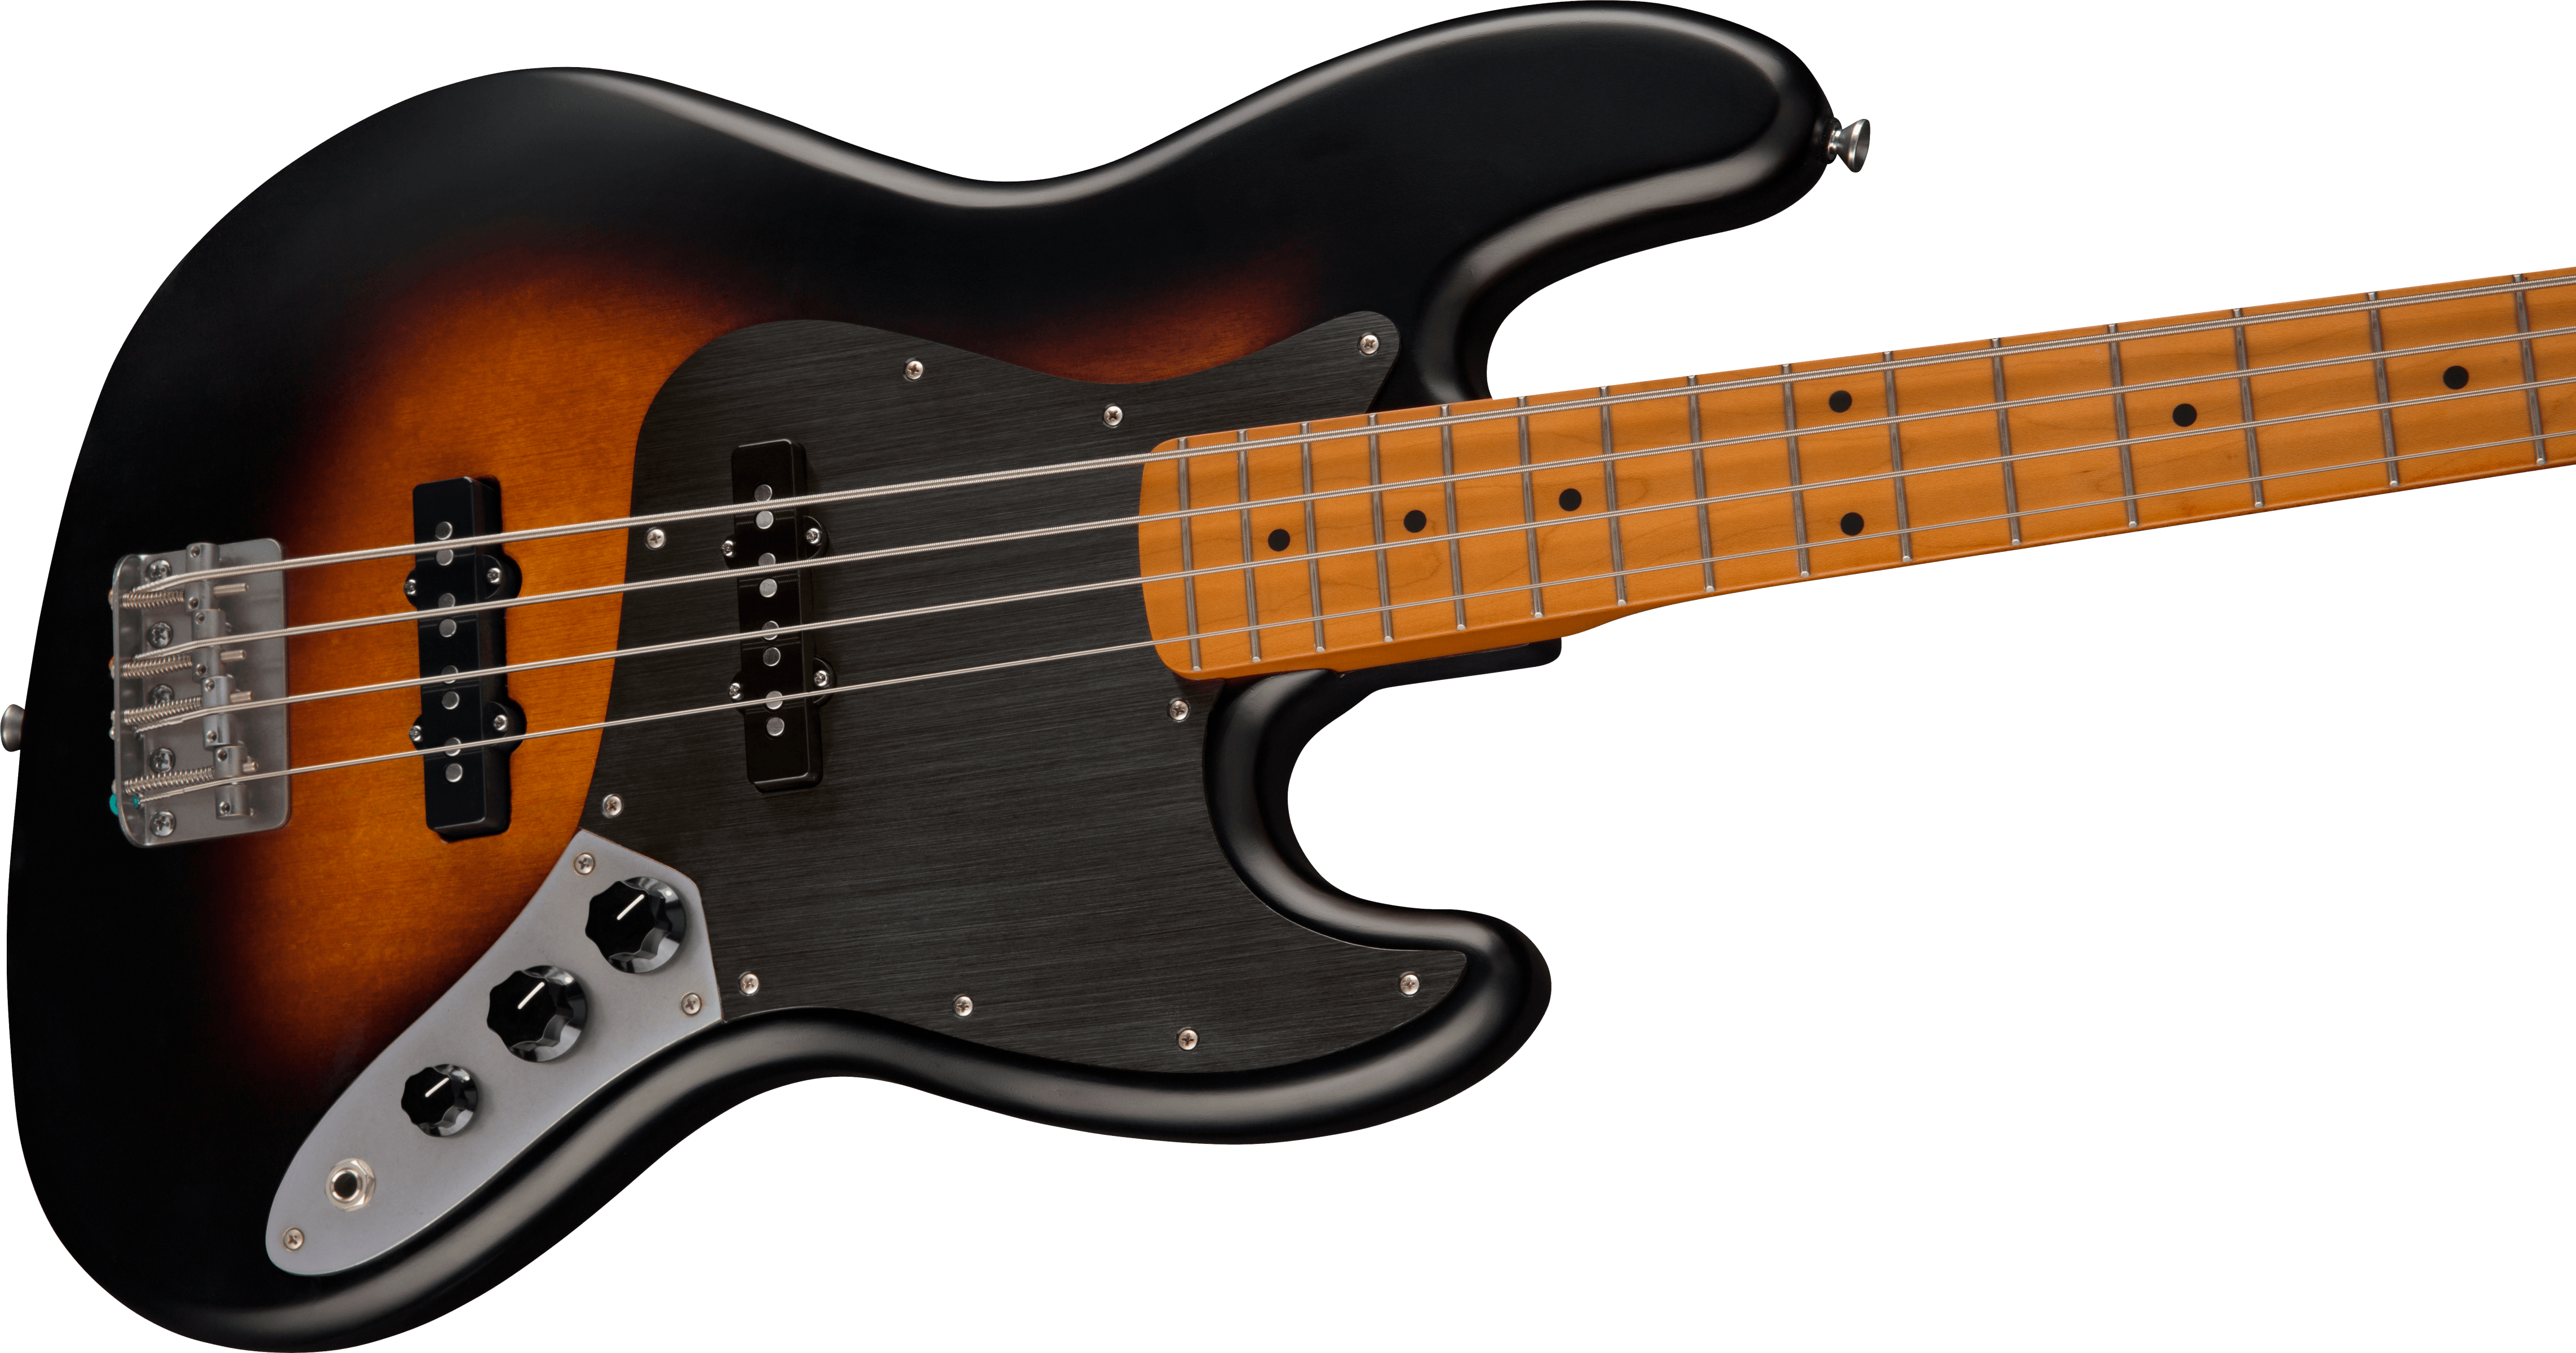 Squier Jazz Bass 40th Anniversary Gold Edition Mn - Satin Wide 2-color Sunburst - Solid body electric bass - Variation 3